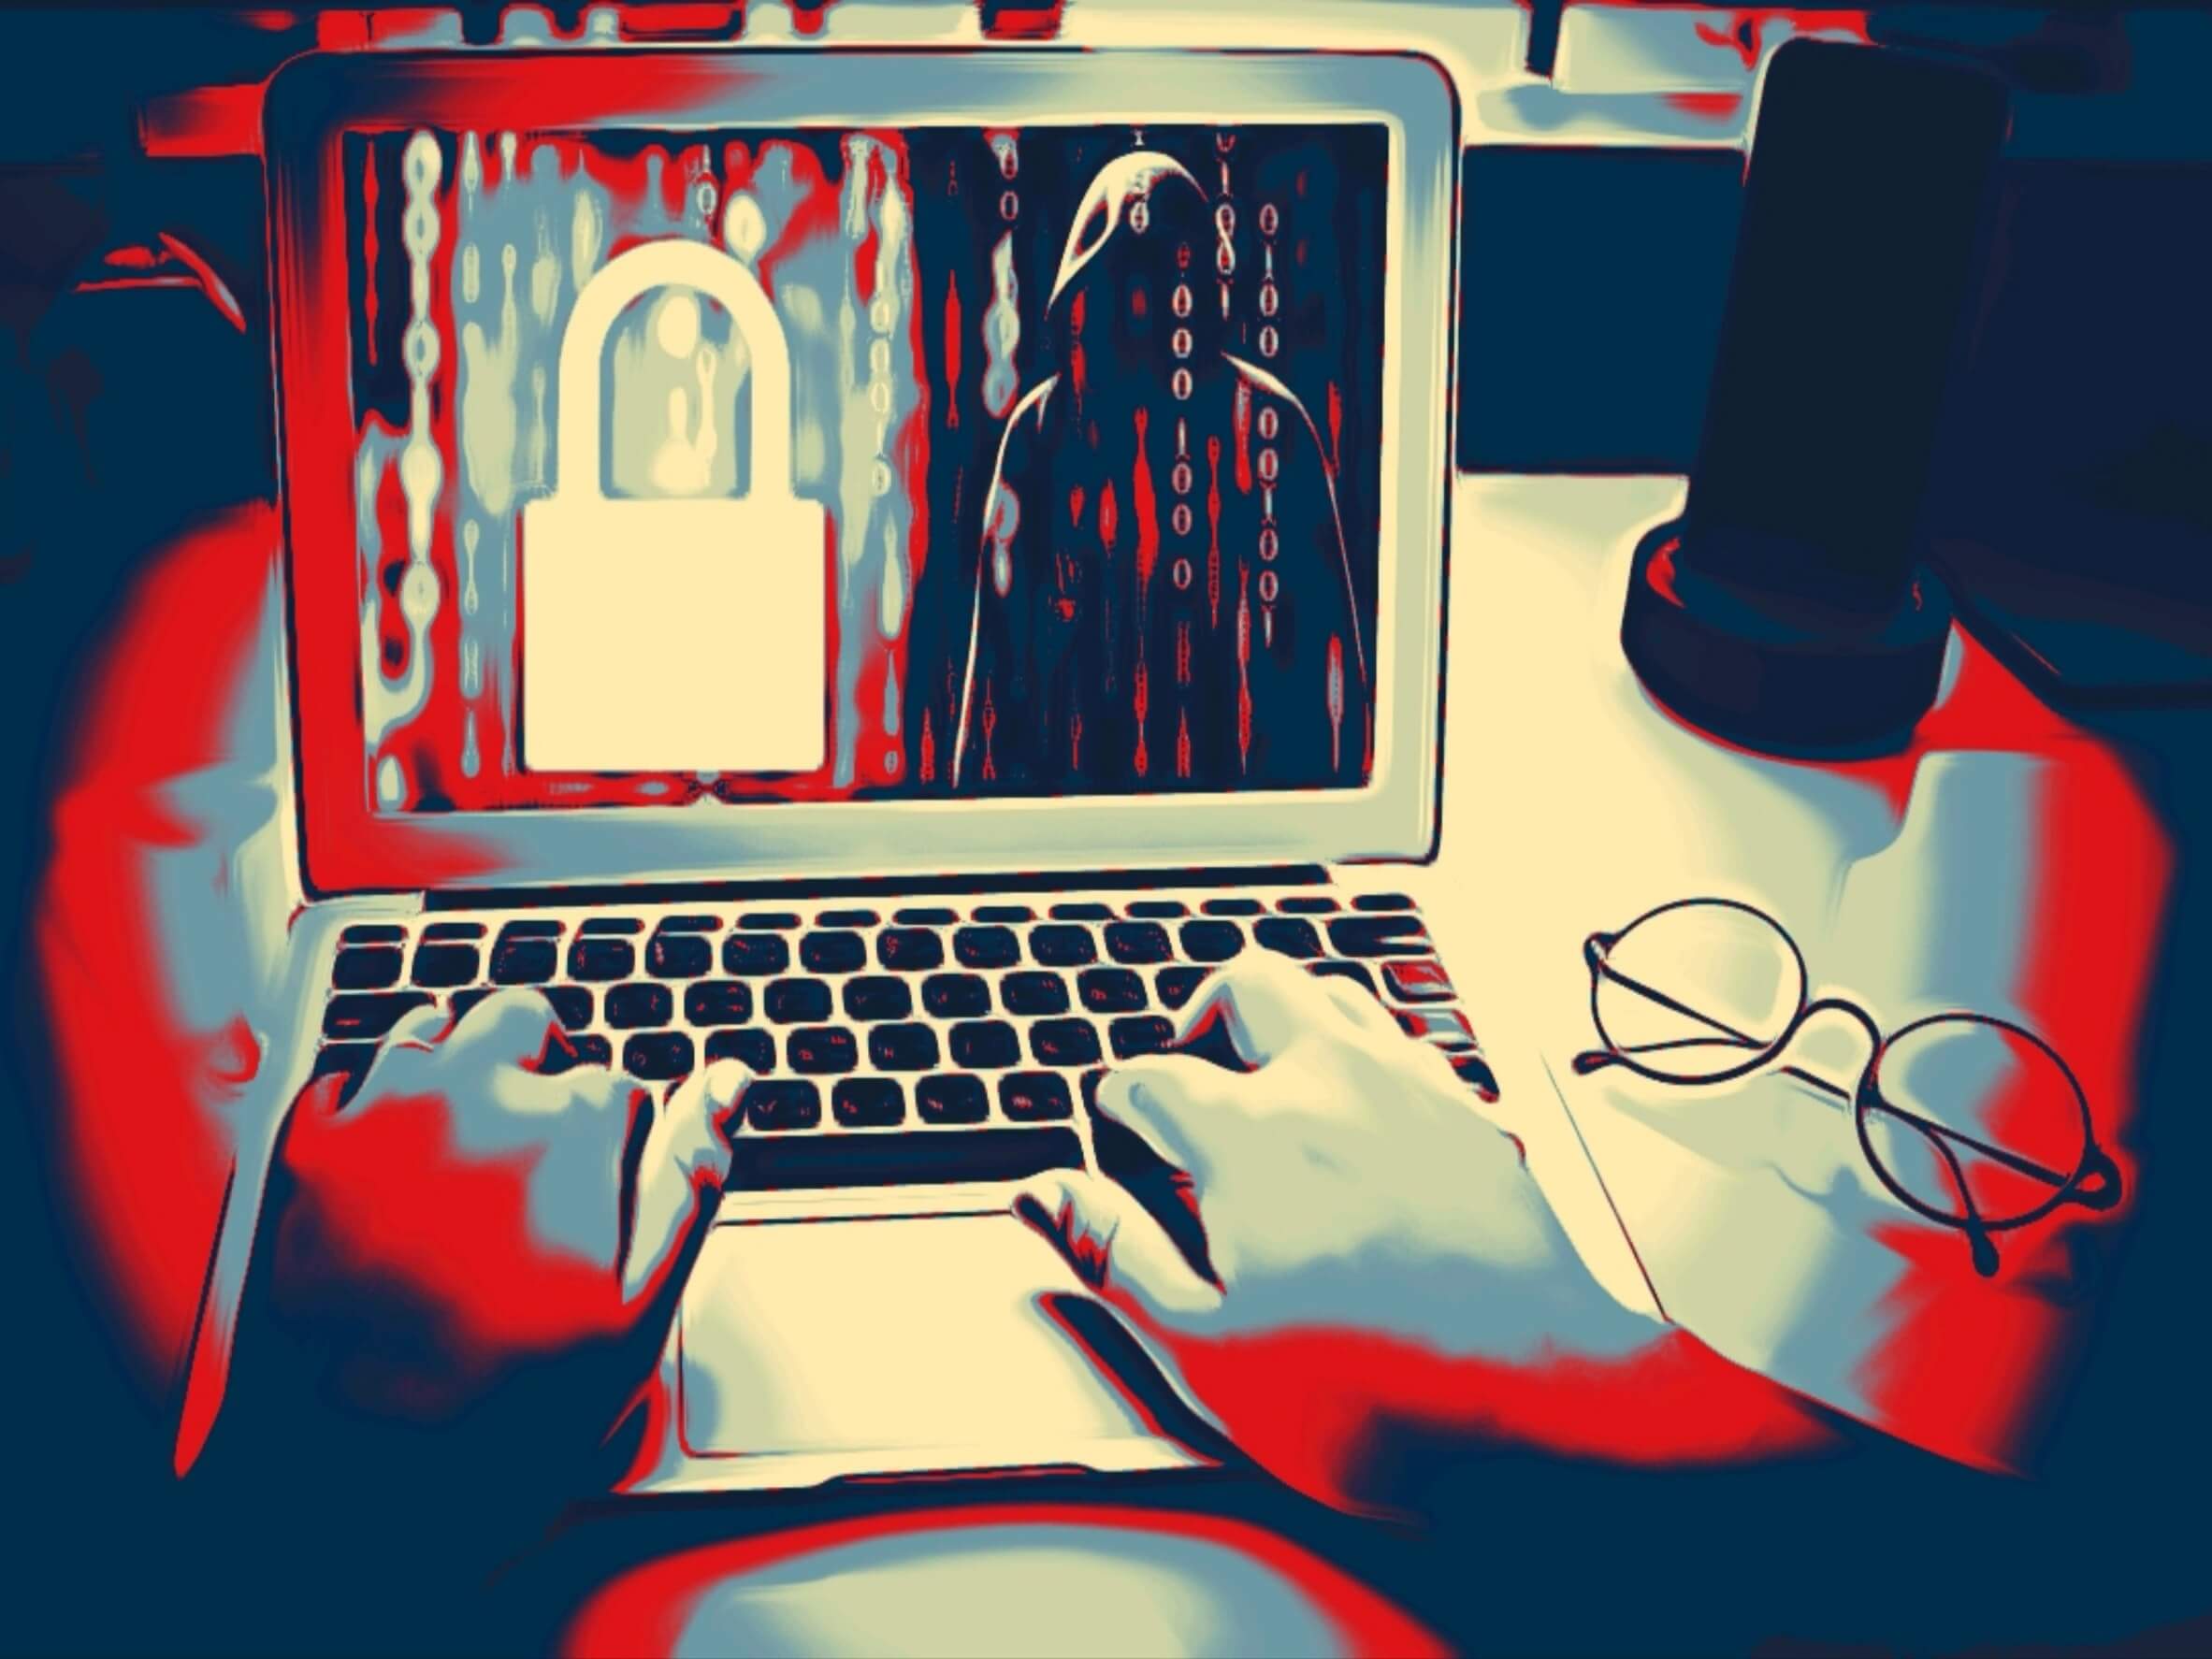 Rise of Ransomware Attacks on Educational Institutions